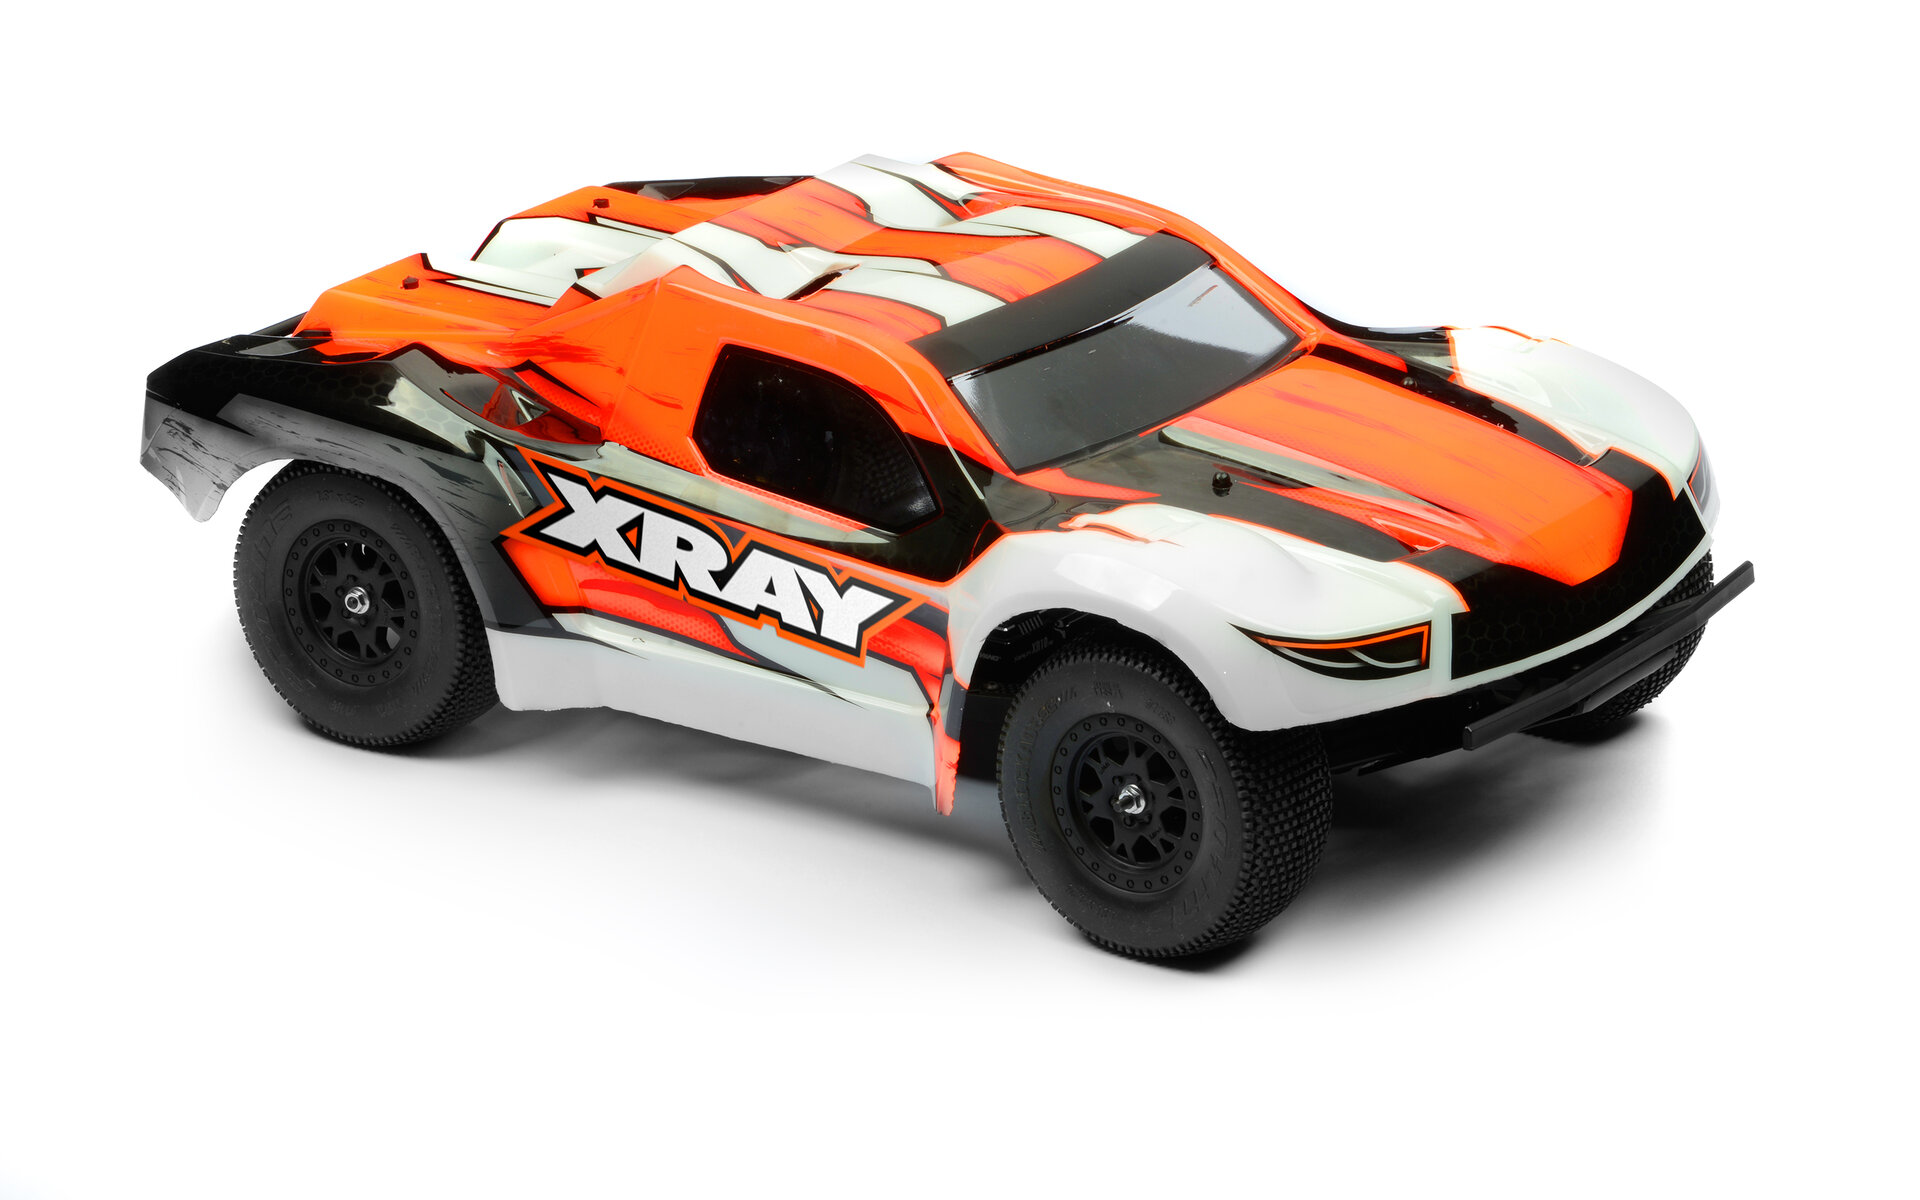 XRAY SCX'23 - 2WD 1/10 ELECTRIC SHORT COURSE TRUCK